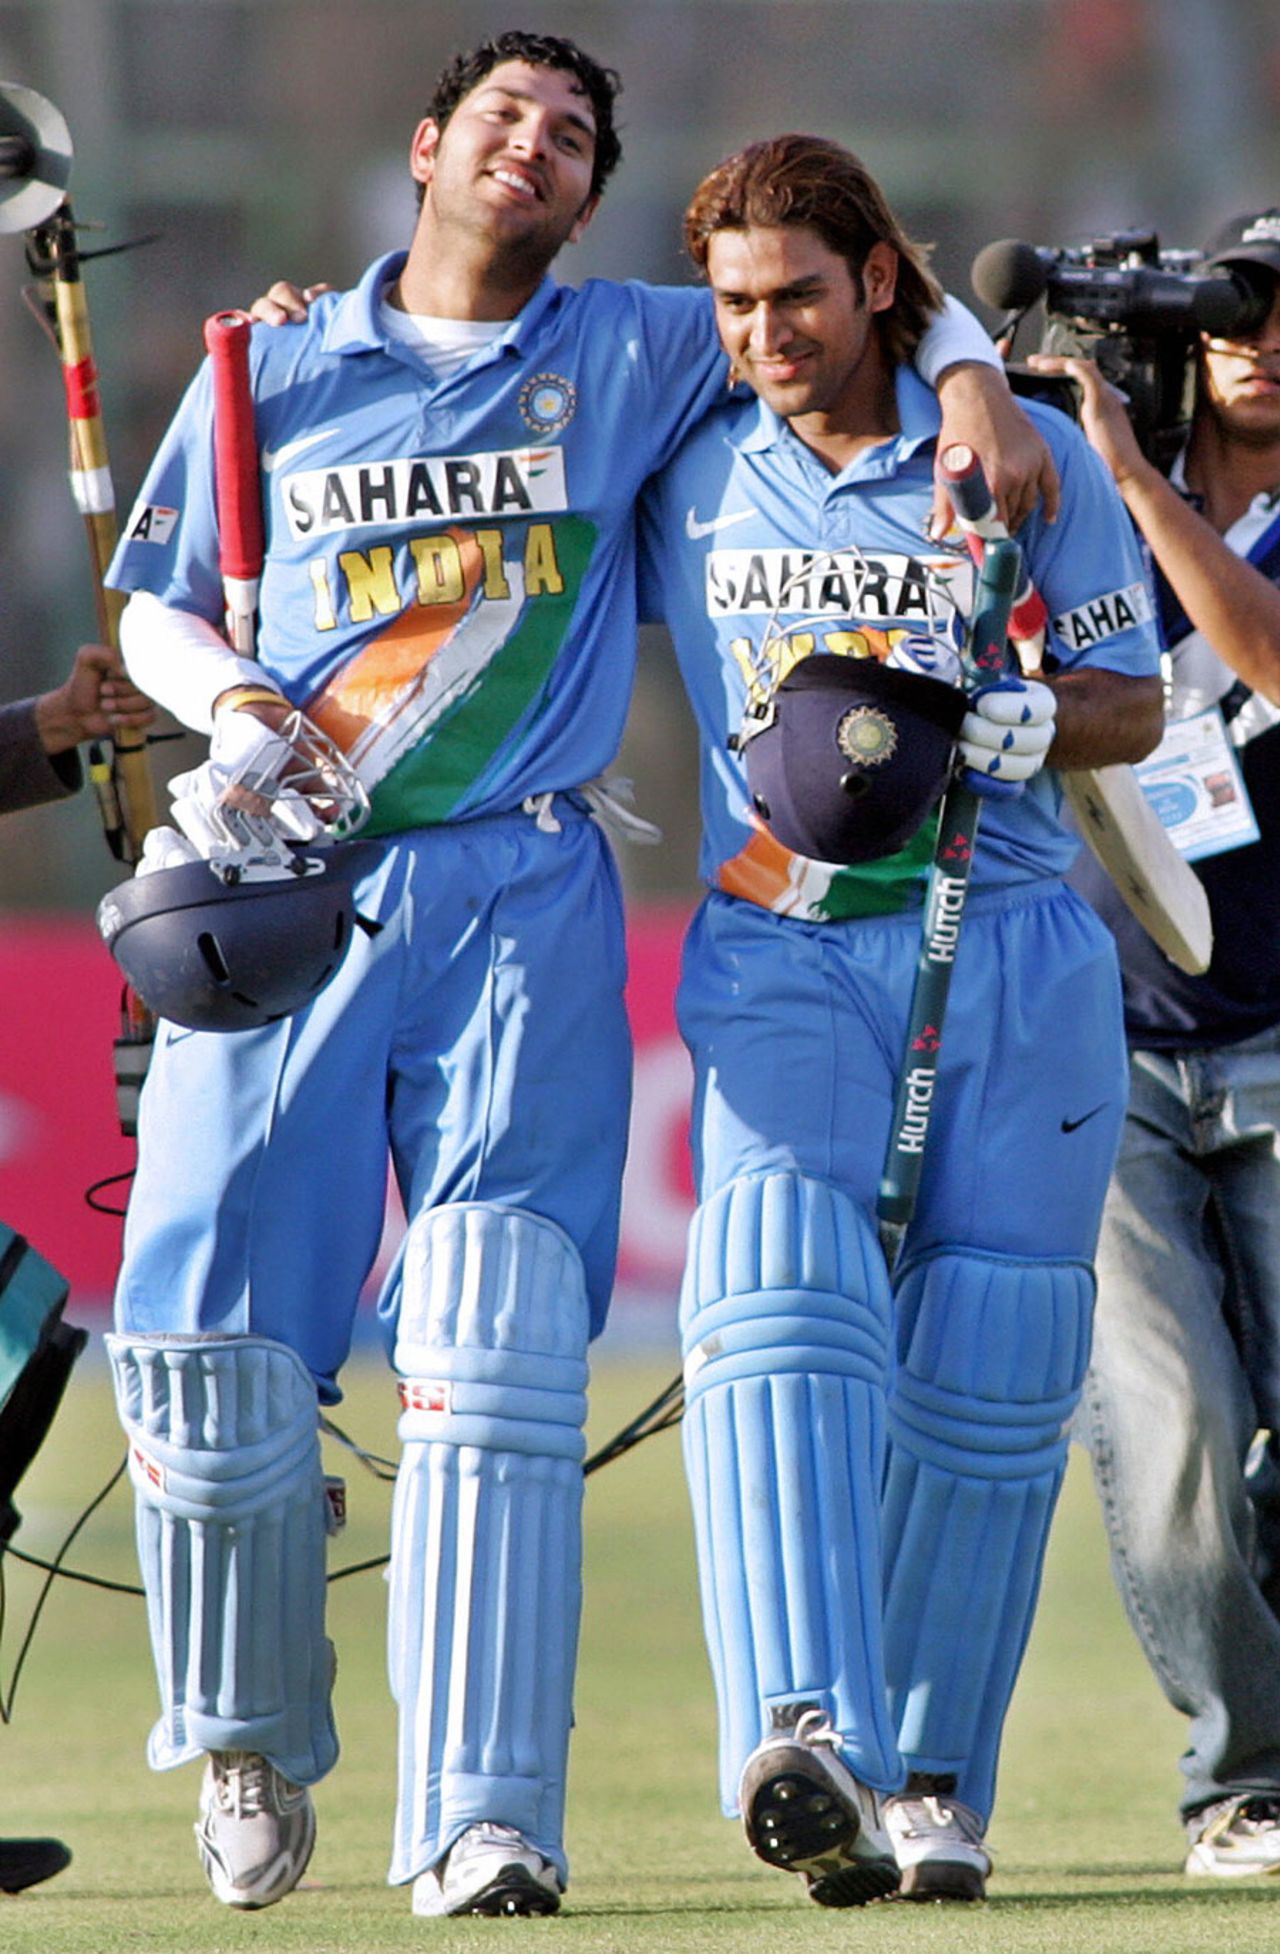 Just another day at work for Yuvraj Singh and Mahendra Singh Dhoni, Pakistan v India, 5th ODI, Karachi, February 19 2006